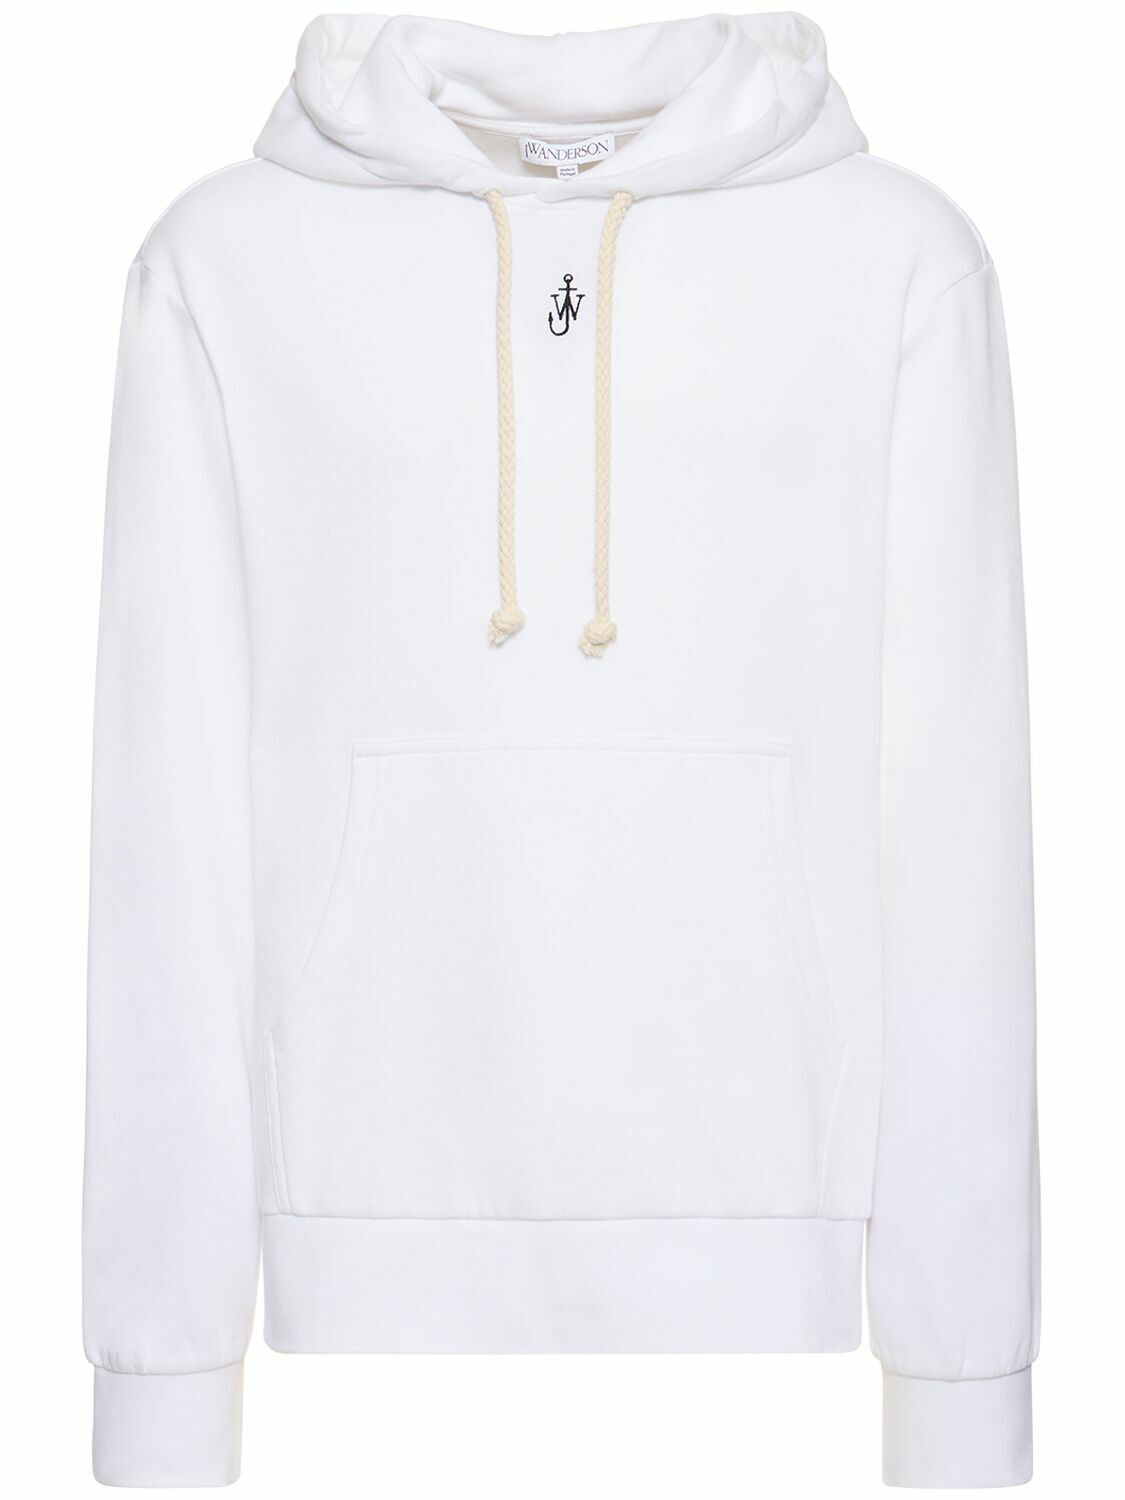 Photo: JW ANDERSON - Logo Embroidery Cotton & Silk Hoodie